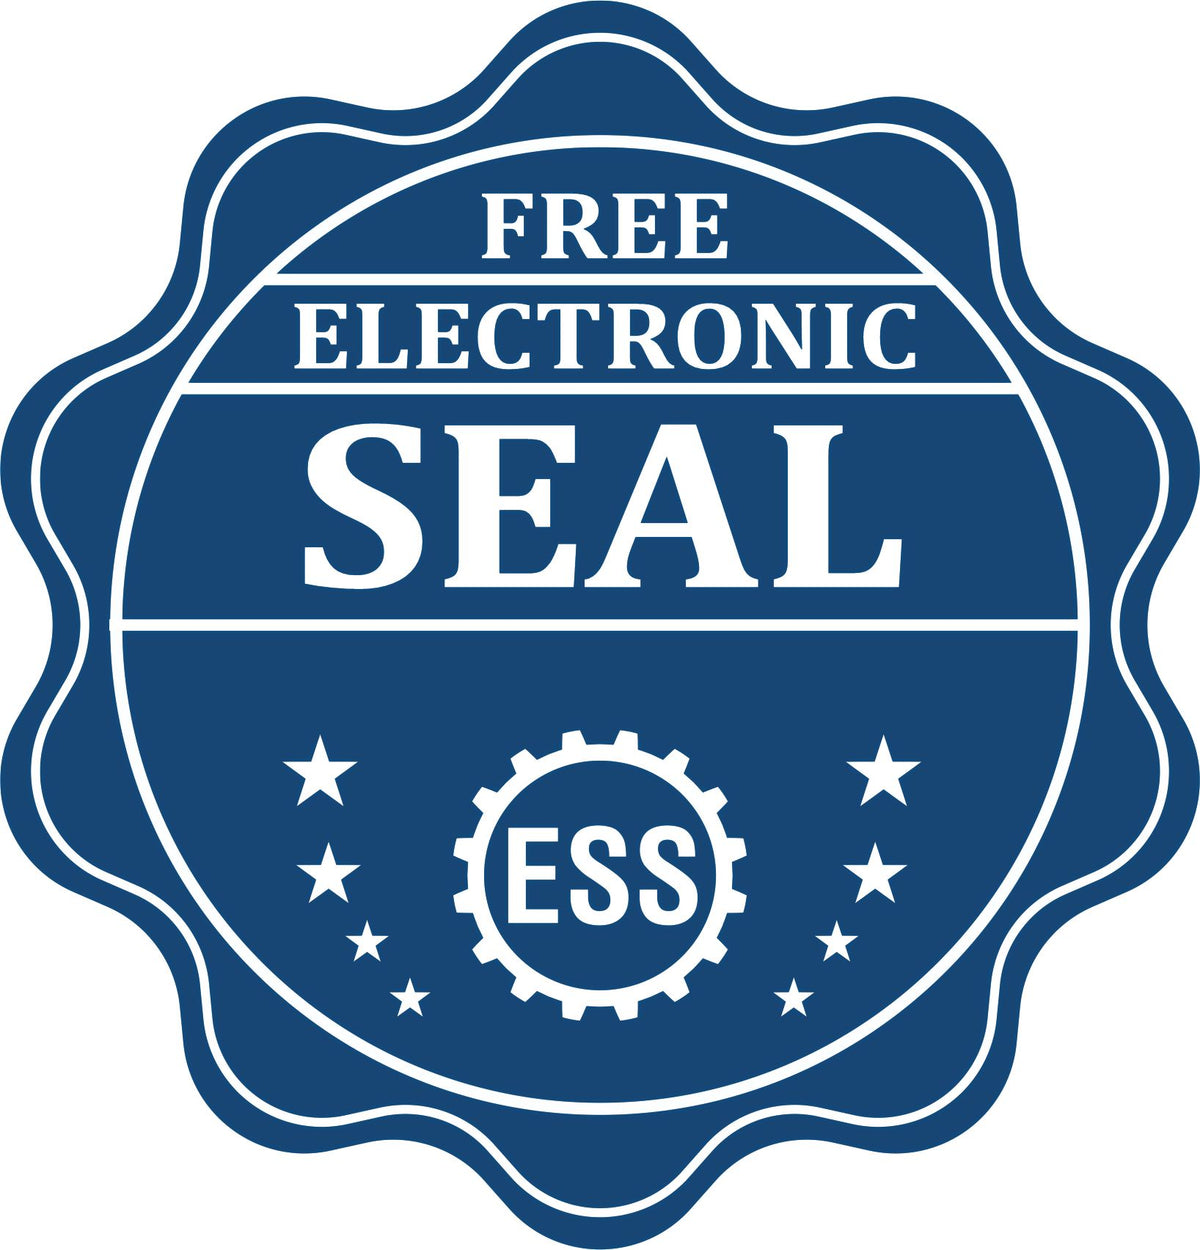 A badge showing a free electronic seal for the Long Reach Texas PE Seal with stars and the ESS gear on the emblem.